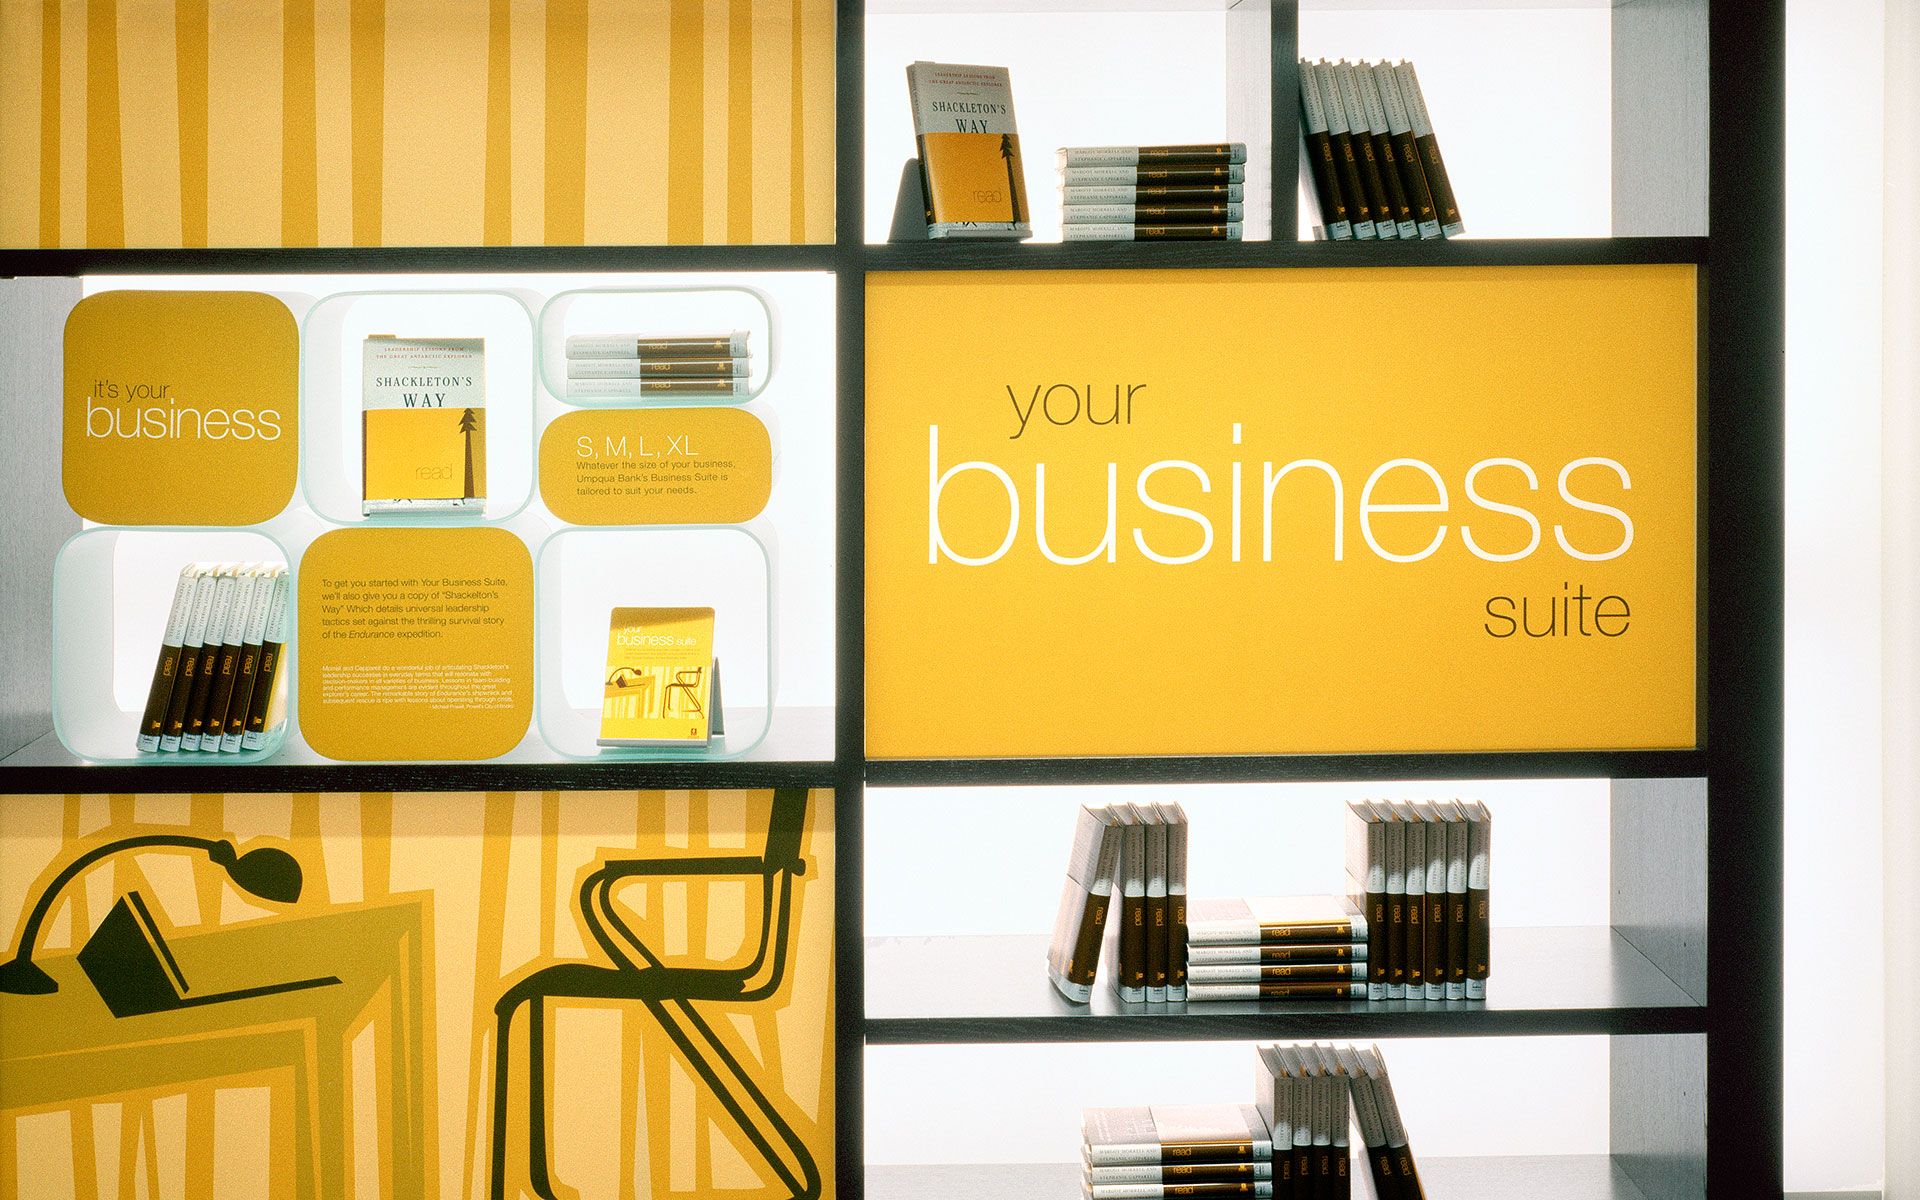 Bright orange backlit shelves with books and pamphlets, with the words “your business suite” printed on an orange panel